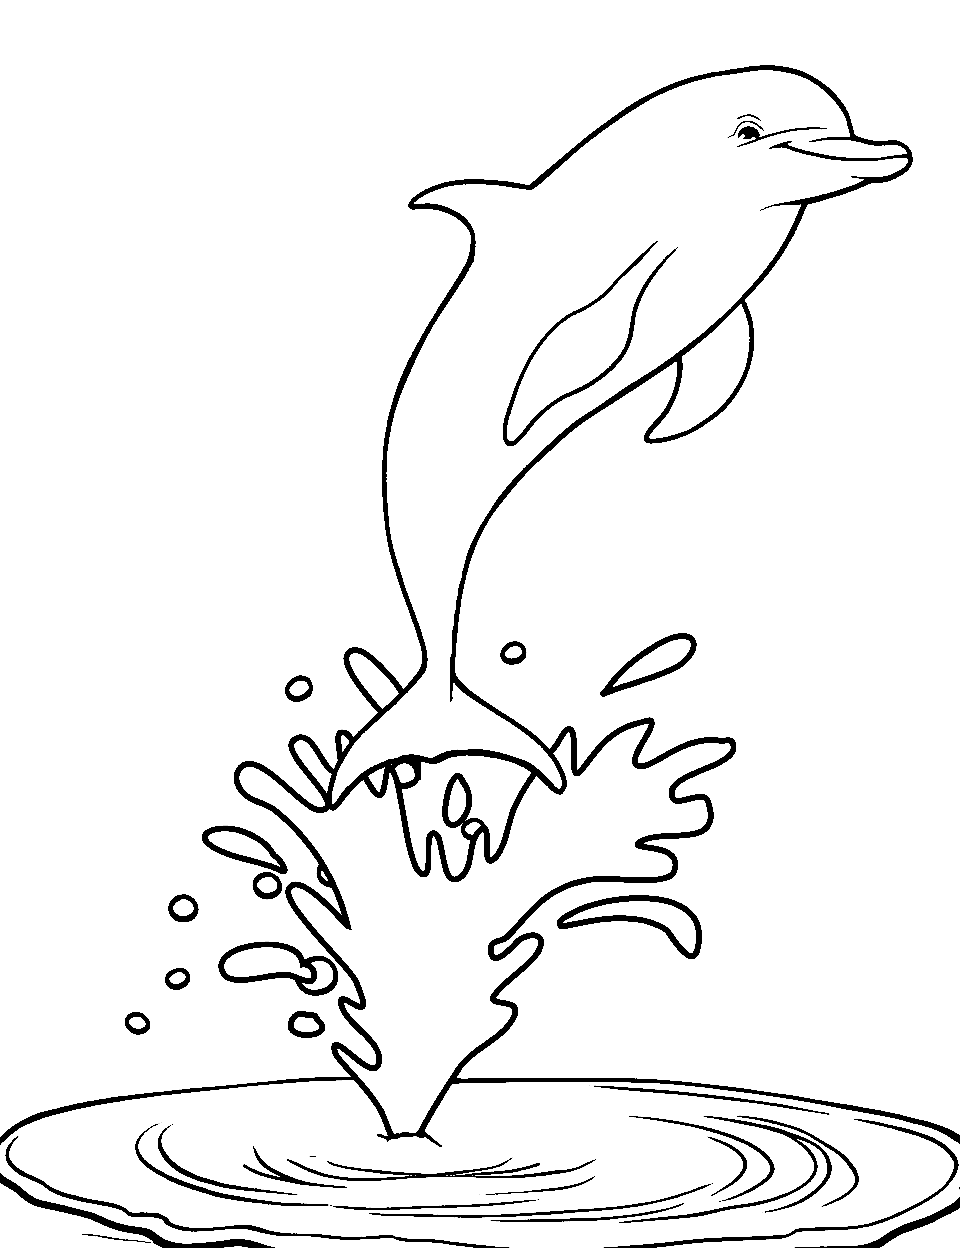 Dolphin Performing Tricks Coloring Page - A dolphin happily performing a trick jumping out of calm water surface.